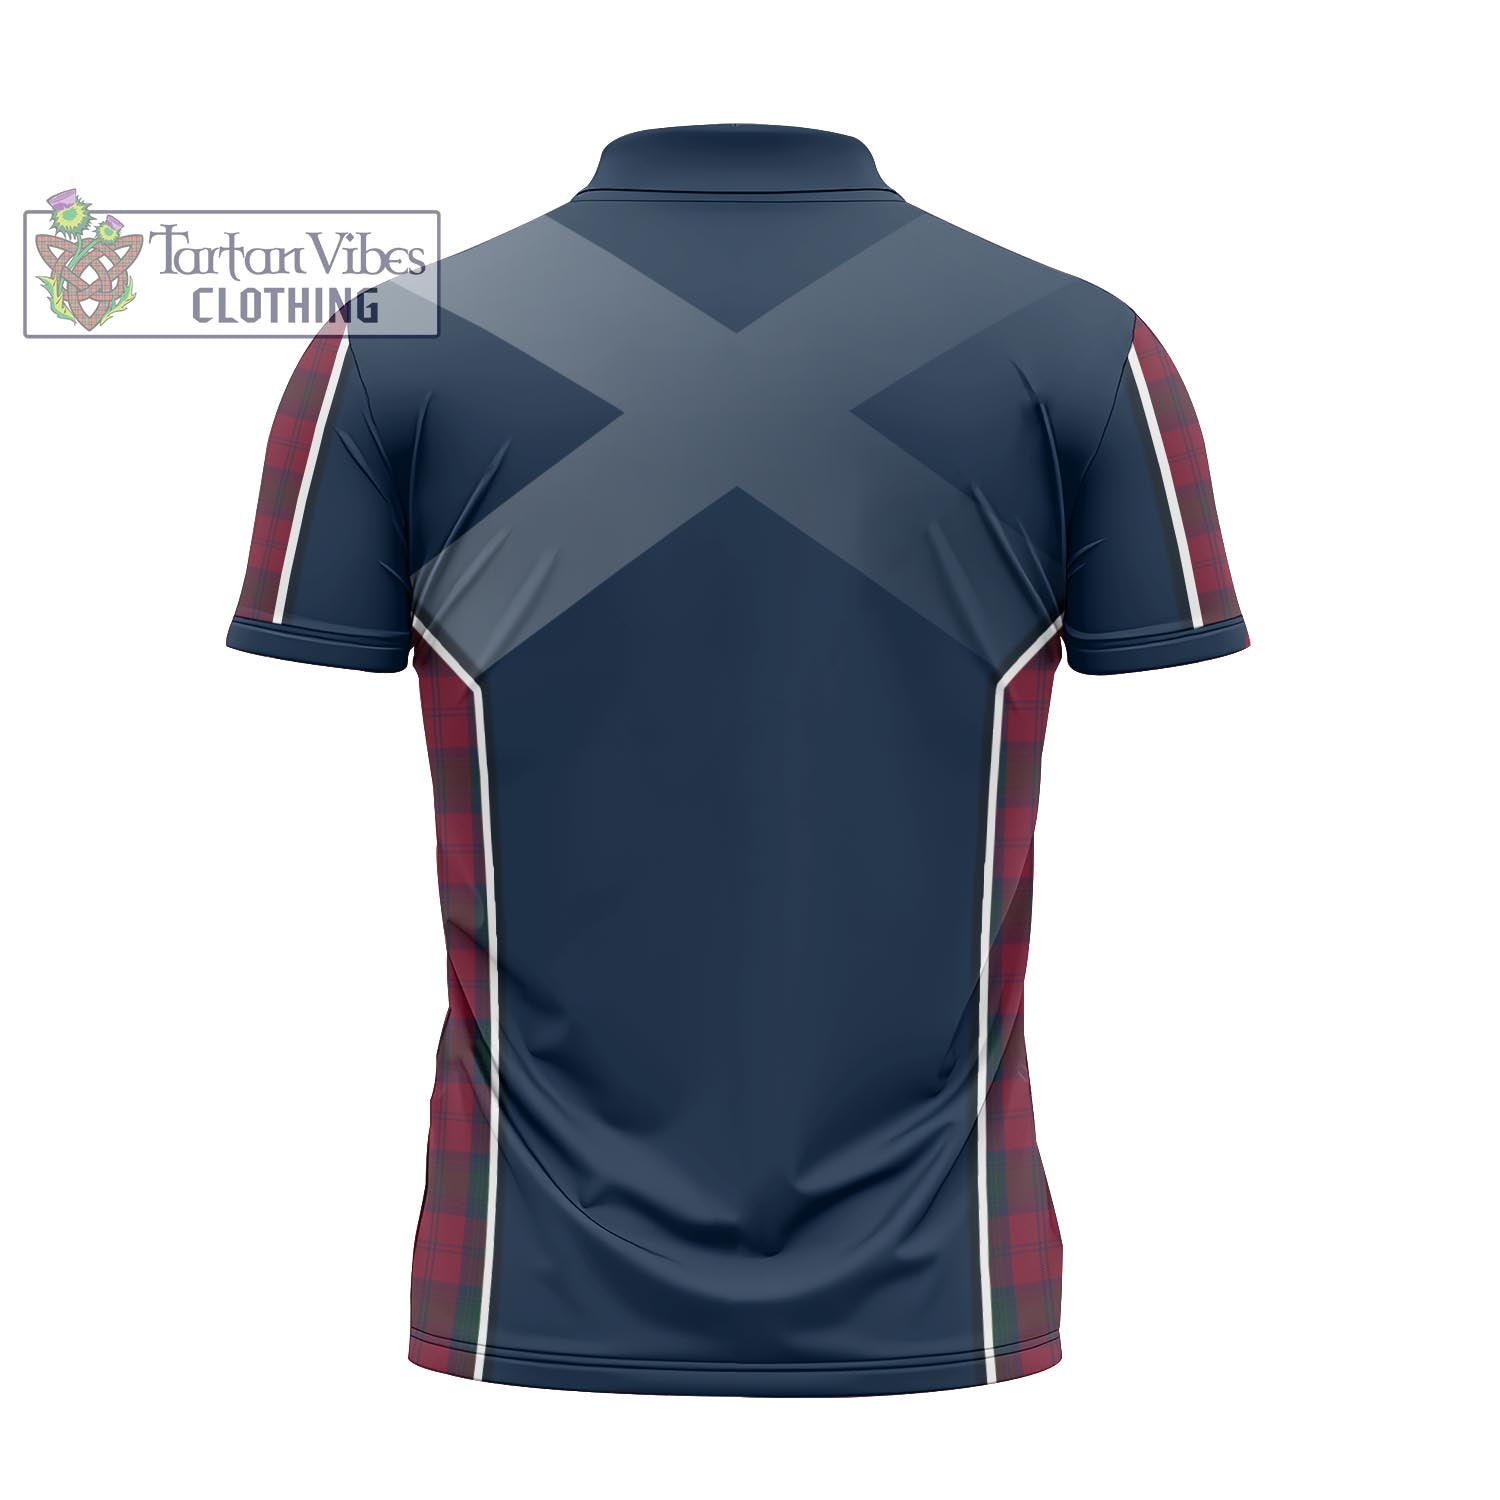 Tartan Vibes Clothing Lindsay Tartan Zipper Polo Shirt with Family Crest and Scottish Thistle Vibes Sport Style